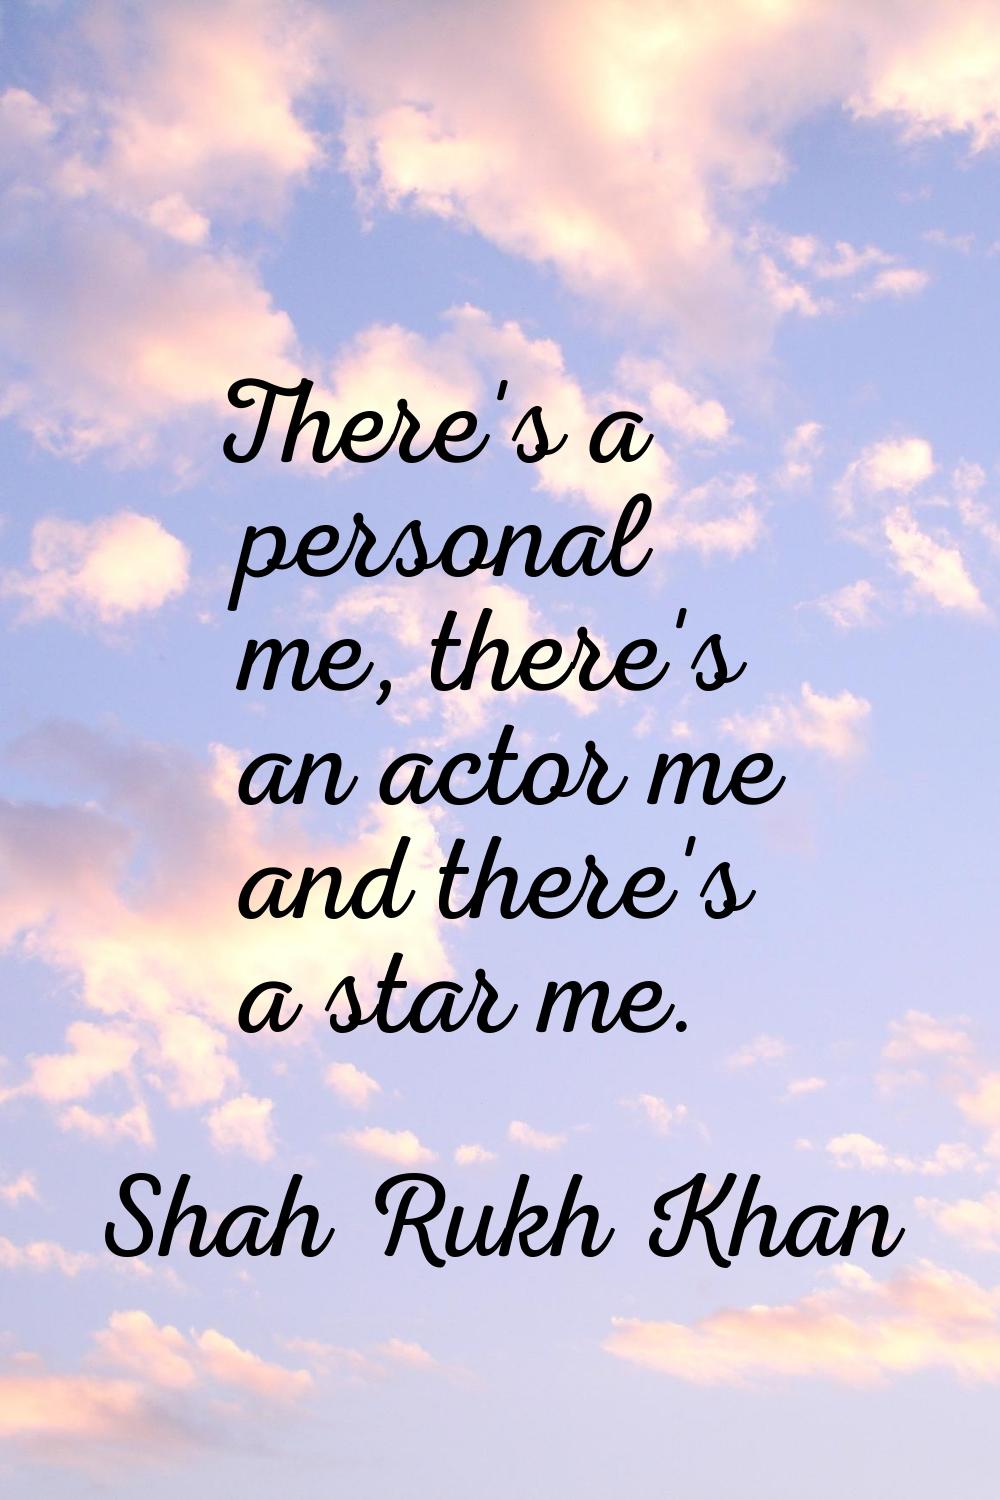 There's a personal me, there's an actor me and there's a star me.